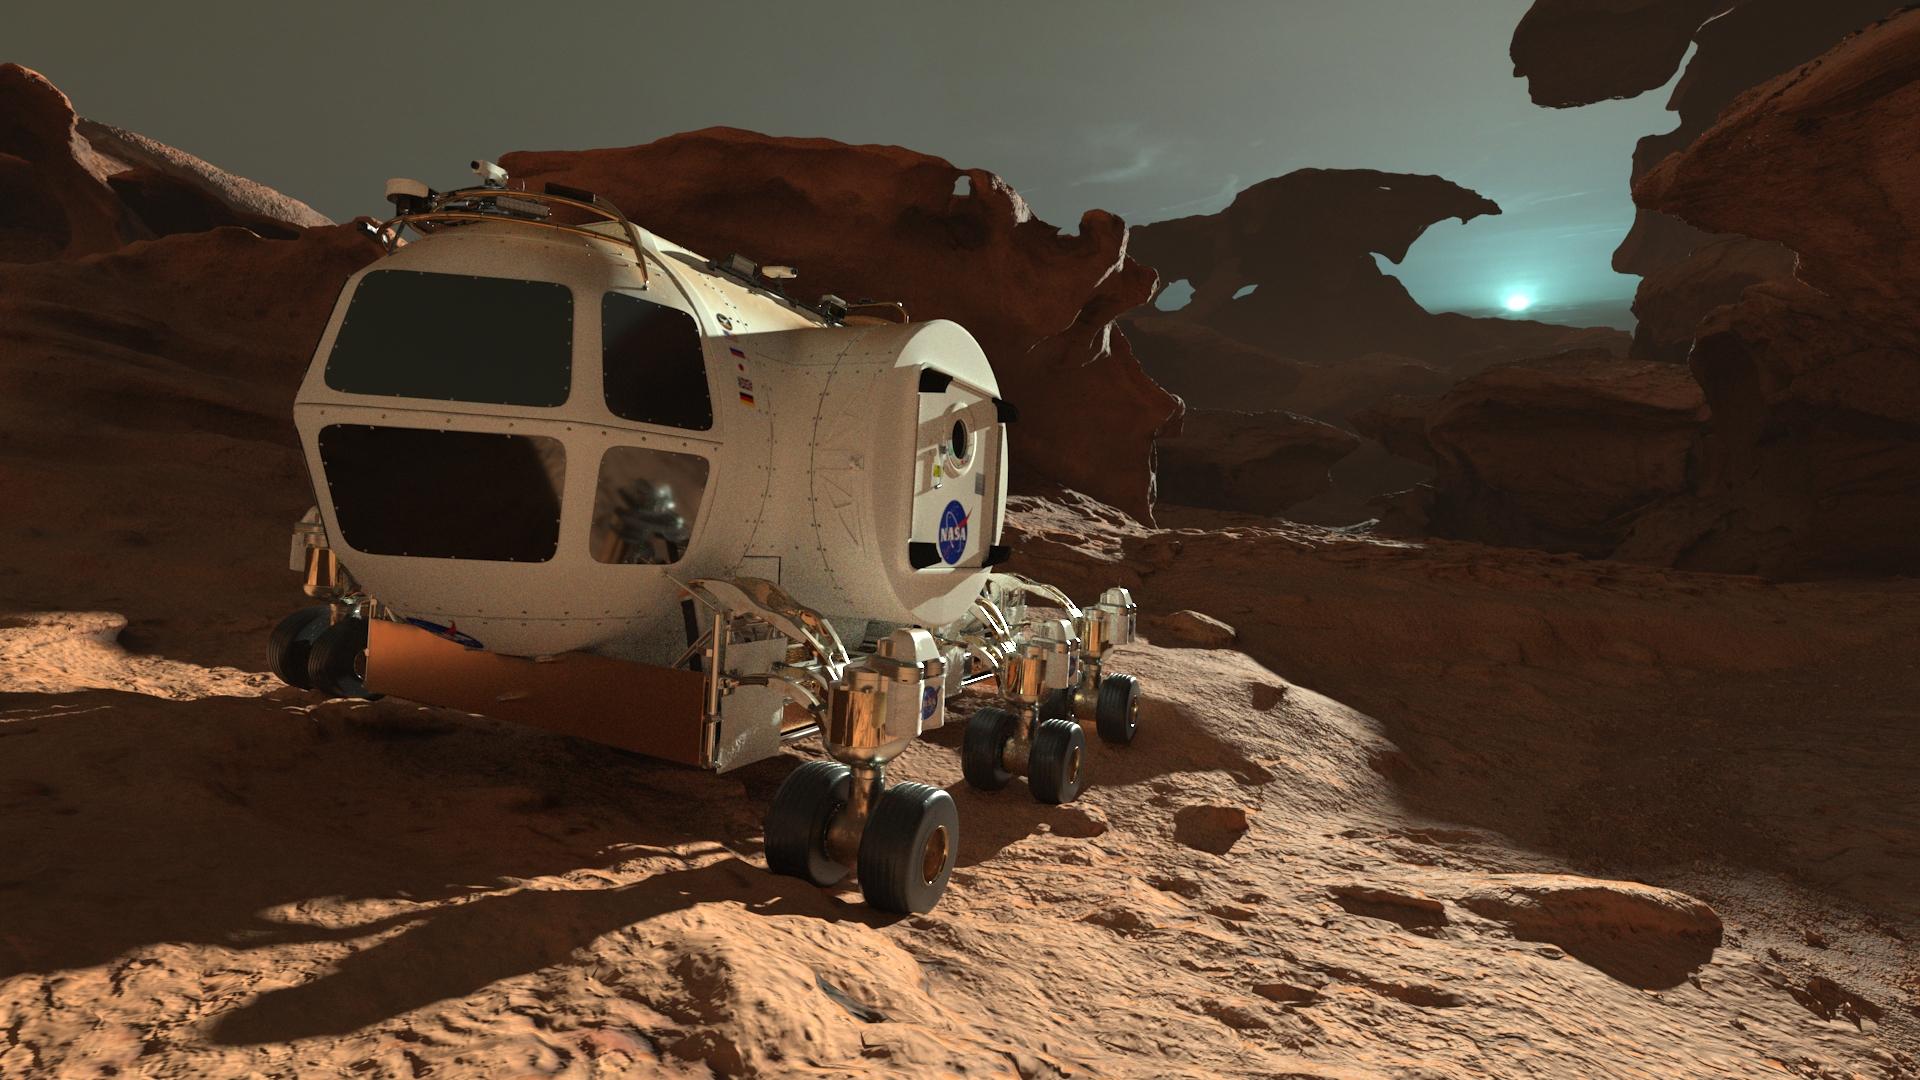 The Hong Kong Space Museum will screen a new sky show, "Mars 1001", at its Space Theatre starting May 1, enabling audiences to embark on a virtual journey that follows astronauts on a fictional 1,001-day first manned mission to explore the red planet. Picture shows the vehicle that astronauts use on Mars for ground transportation in the show. Due to the large temperature difference between day and night on Mars, astronauts cannot stay outside for a long period of time. (Source of photo: © Mirage3D)